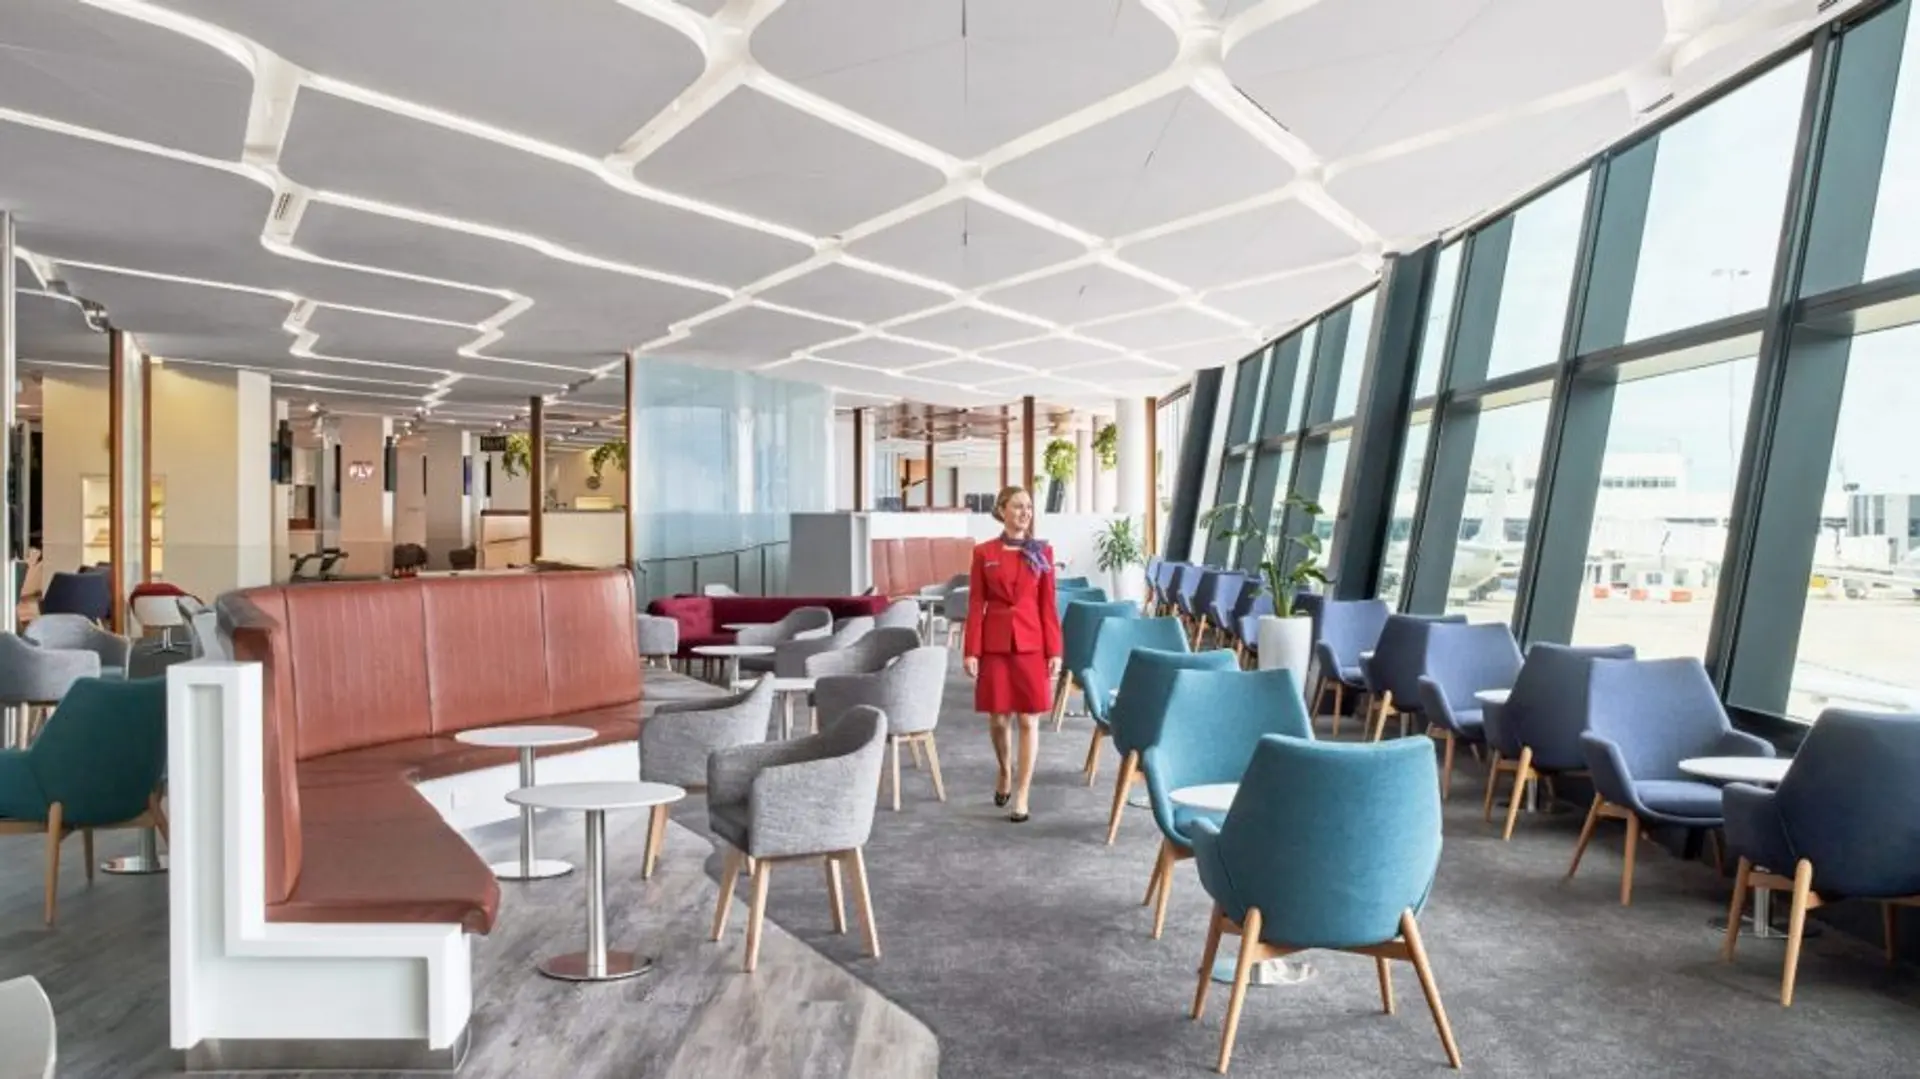 Airlines News - Virgin Australia offers in-lounge massages during December